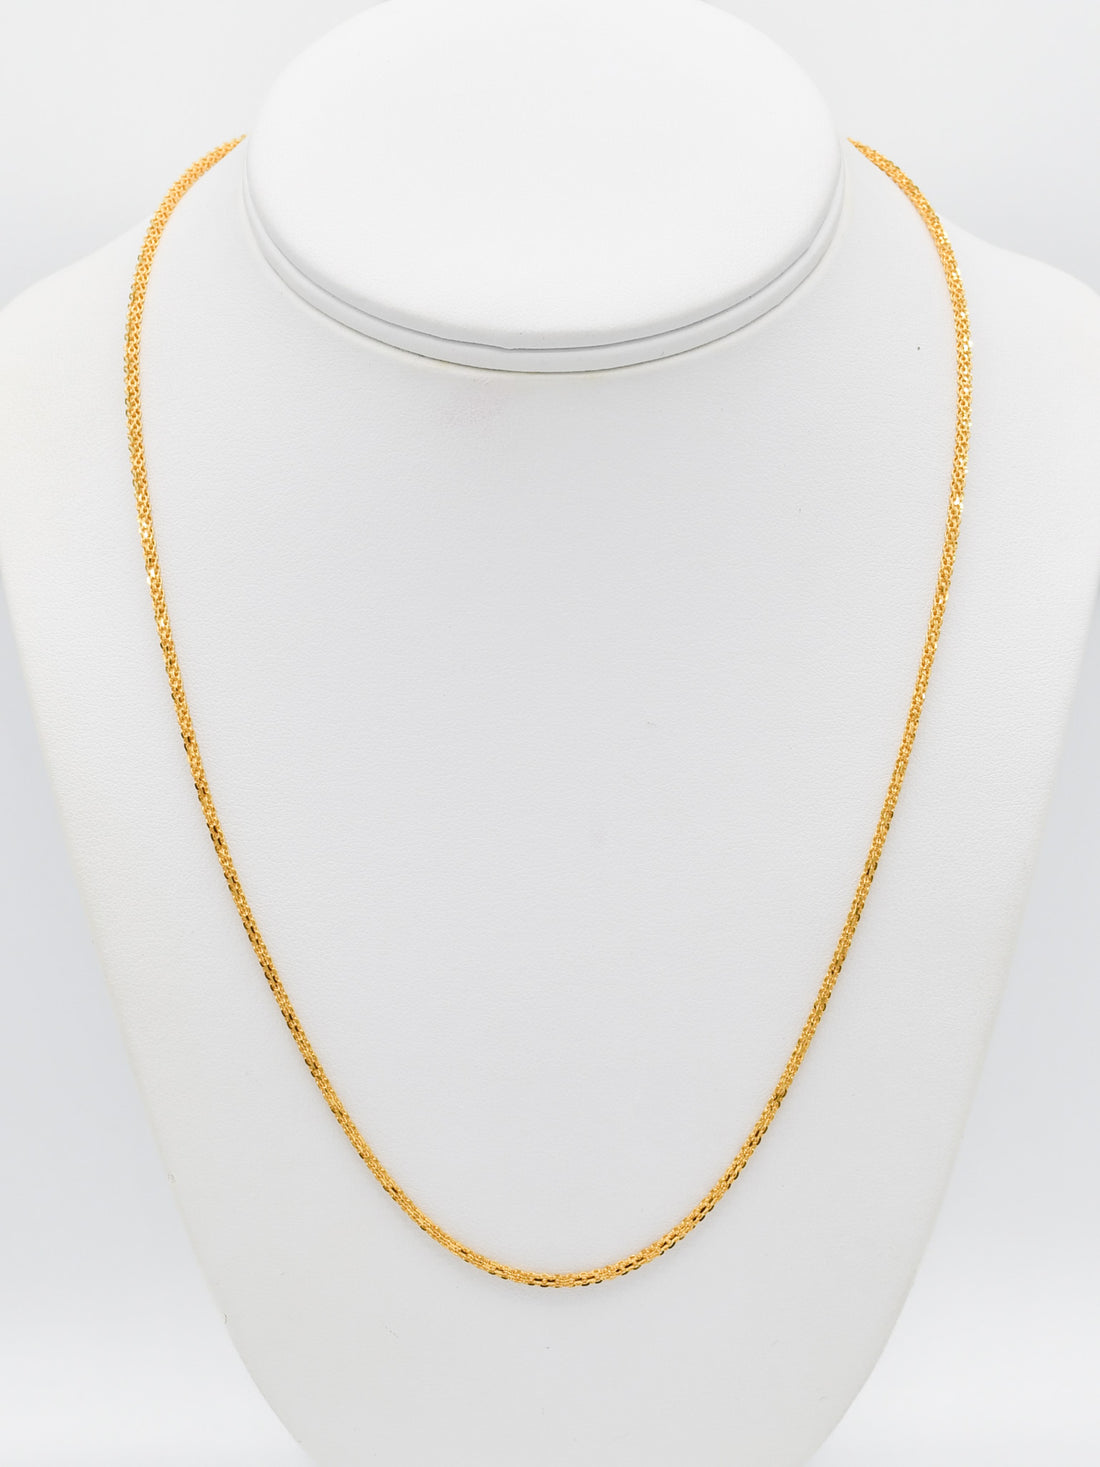 22ct Gold Chain - Roop Darshan